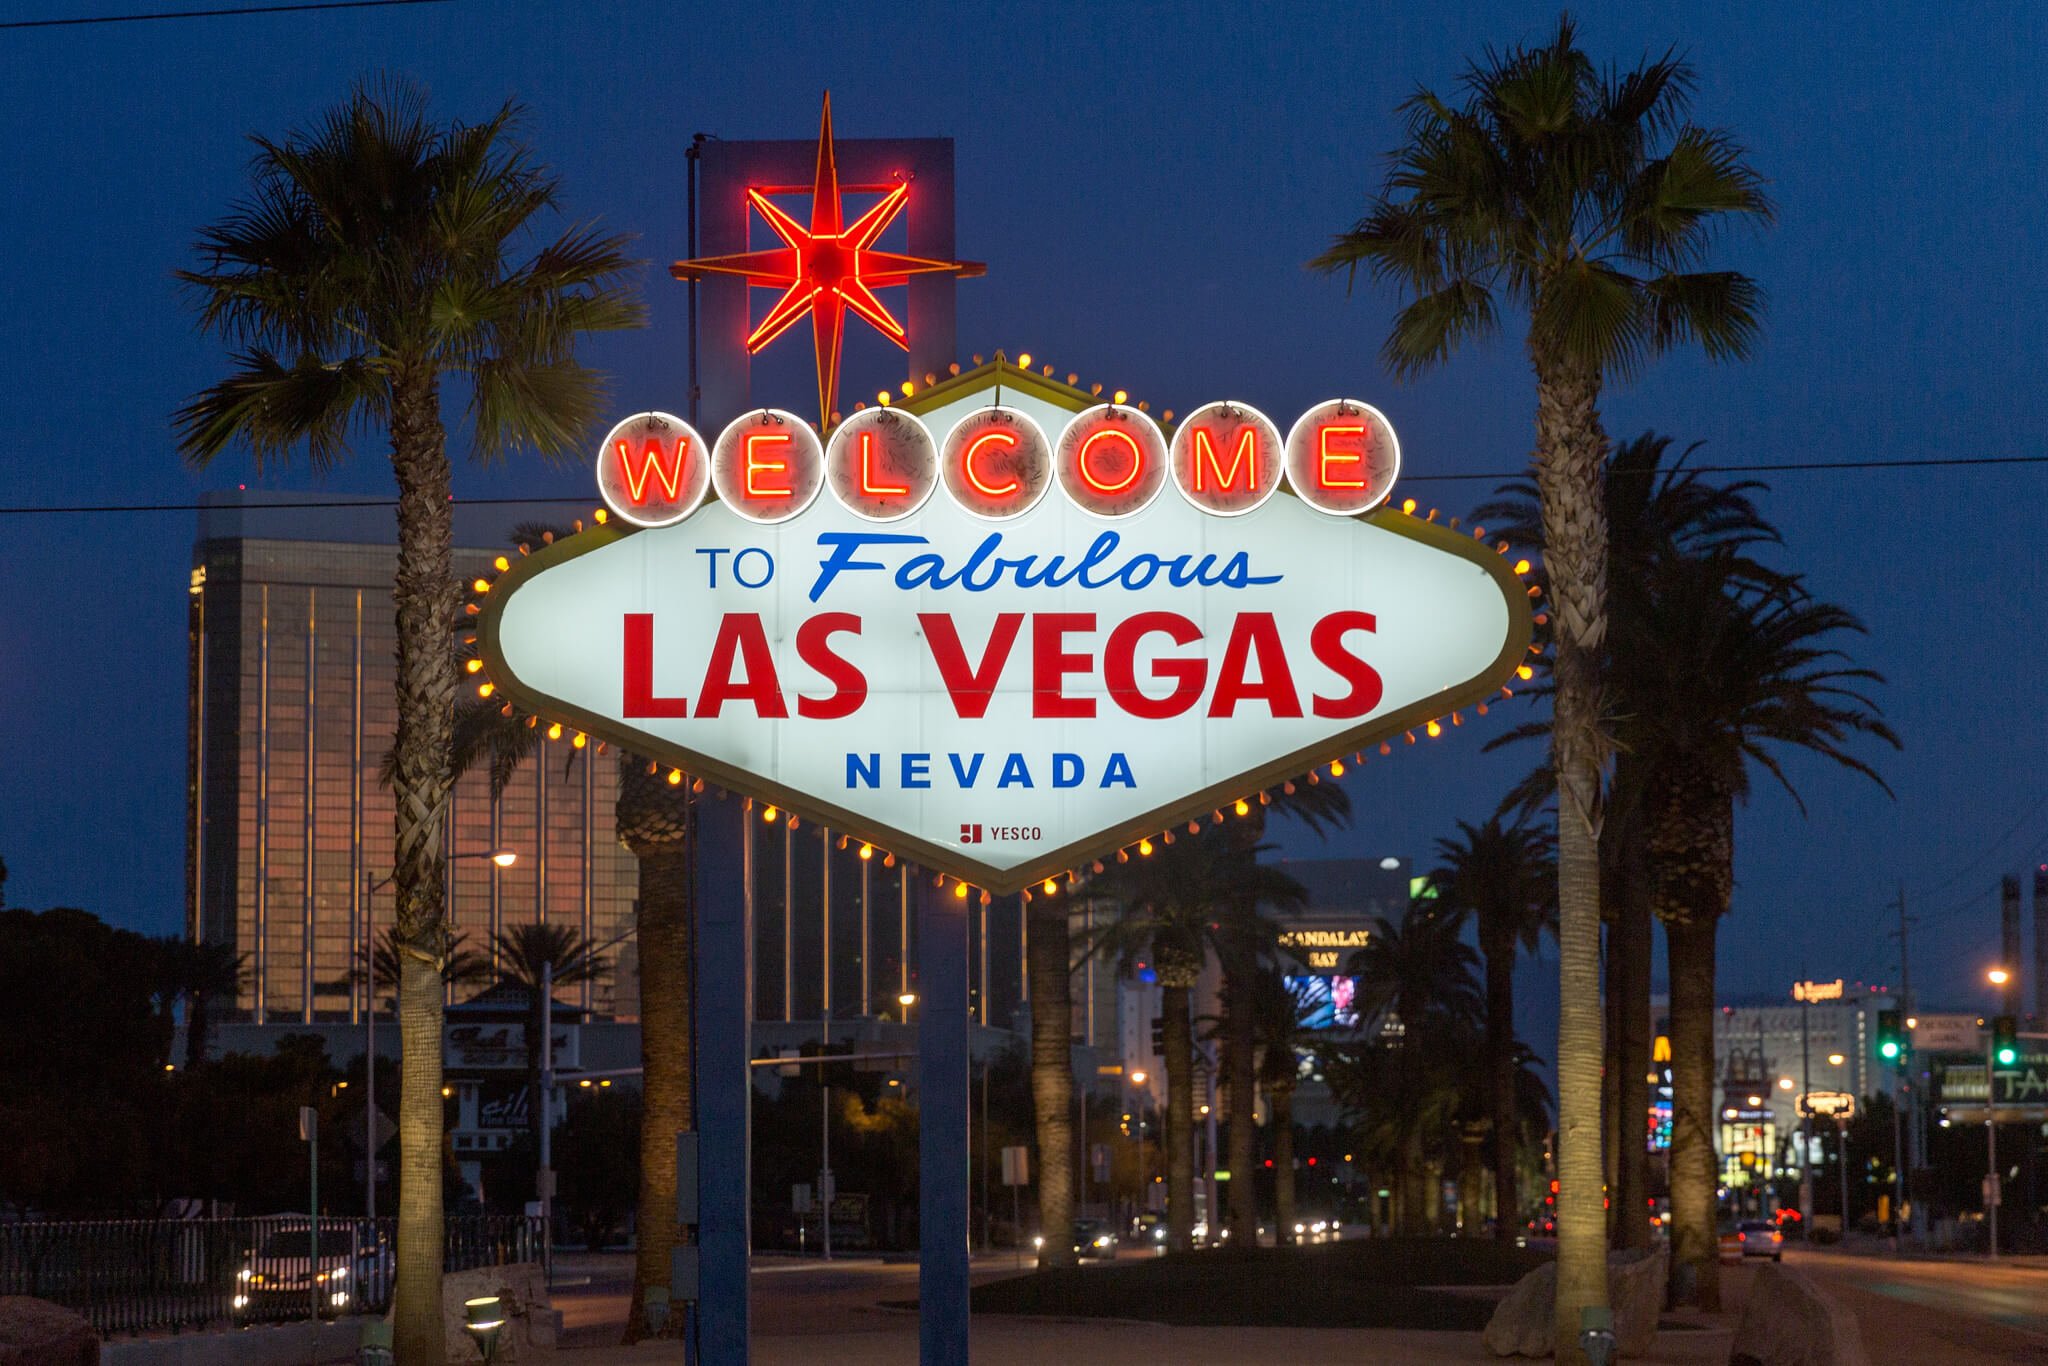 Changes in the Cards for Iconic Las Vegas Strip After Big Hotel